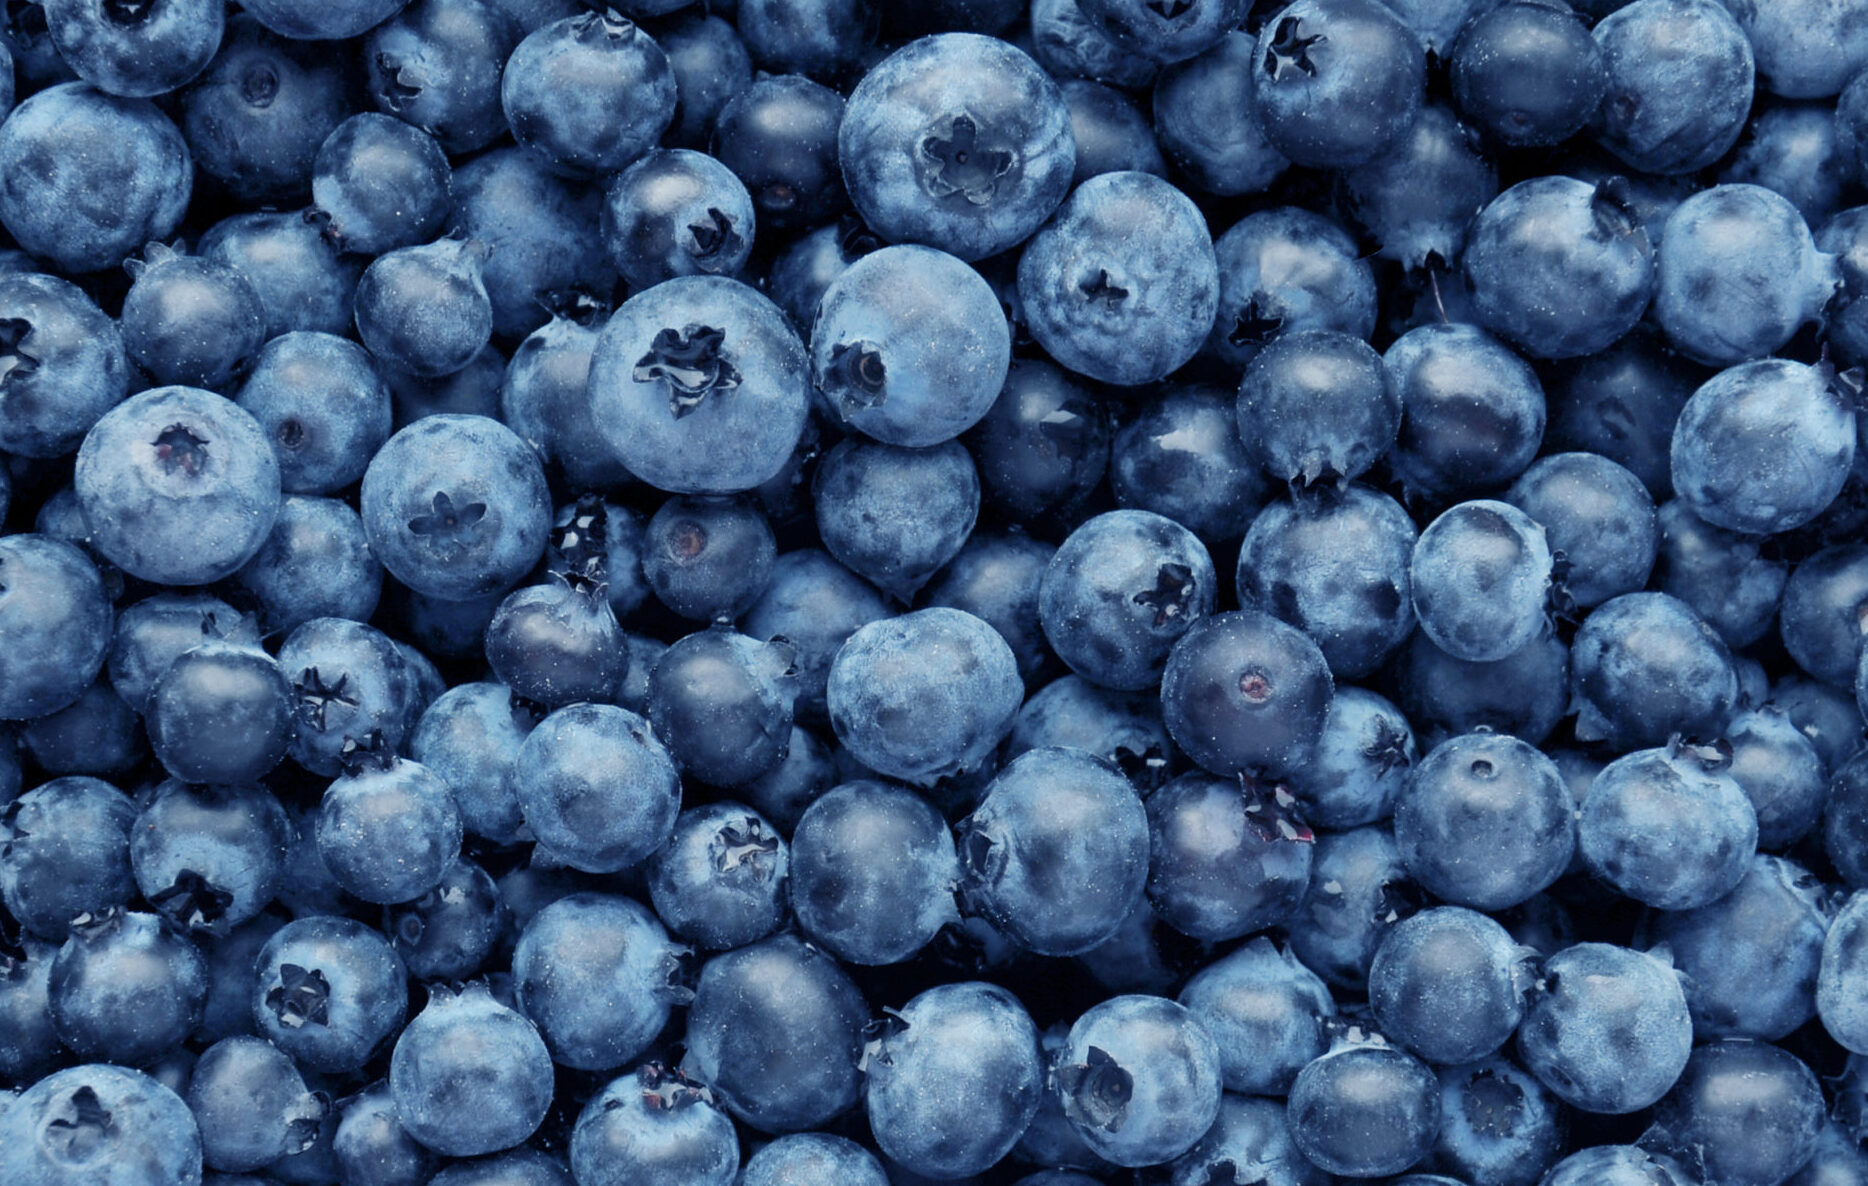 A background full of freshly picked blueberries